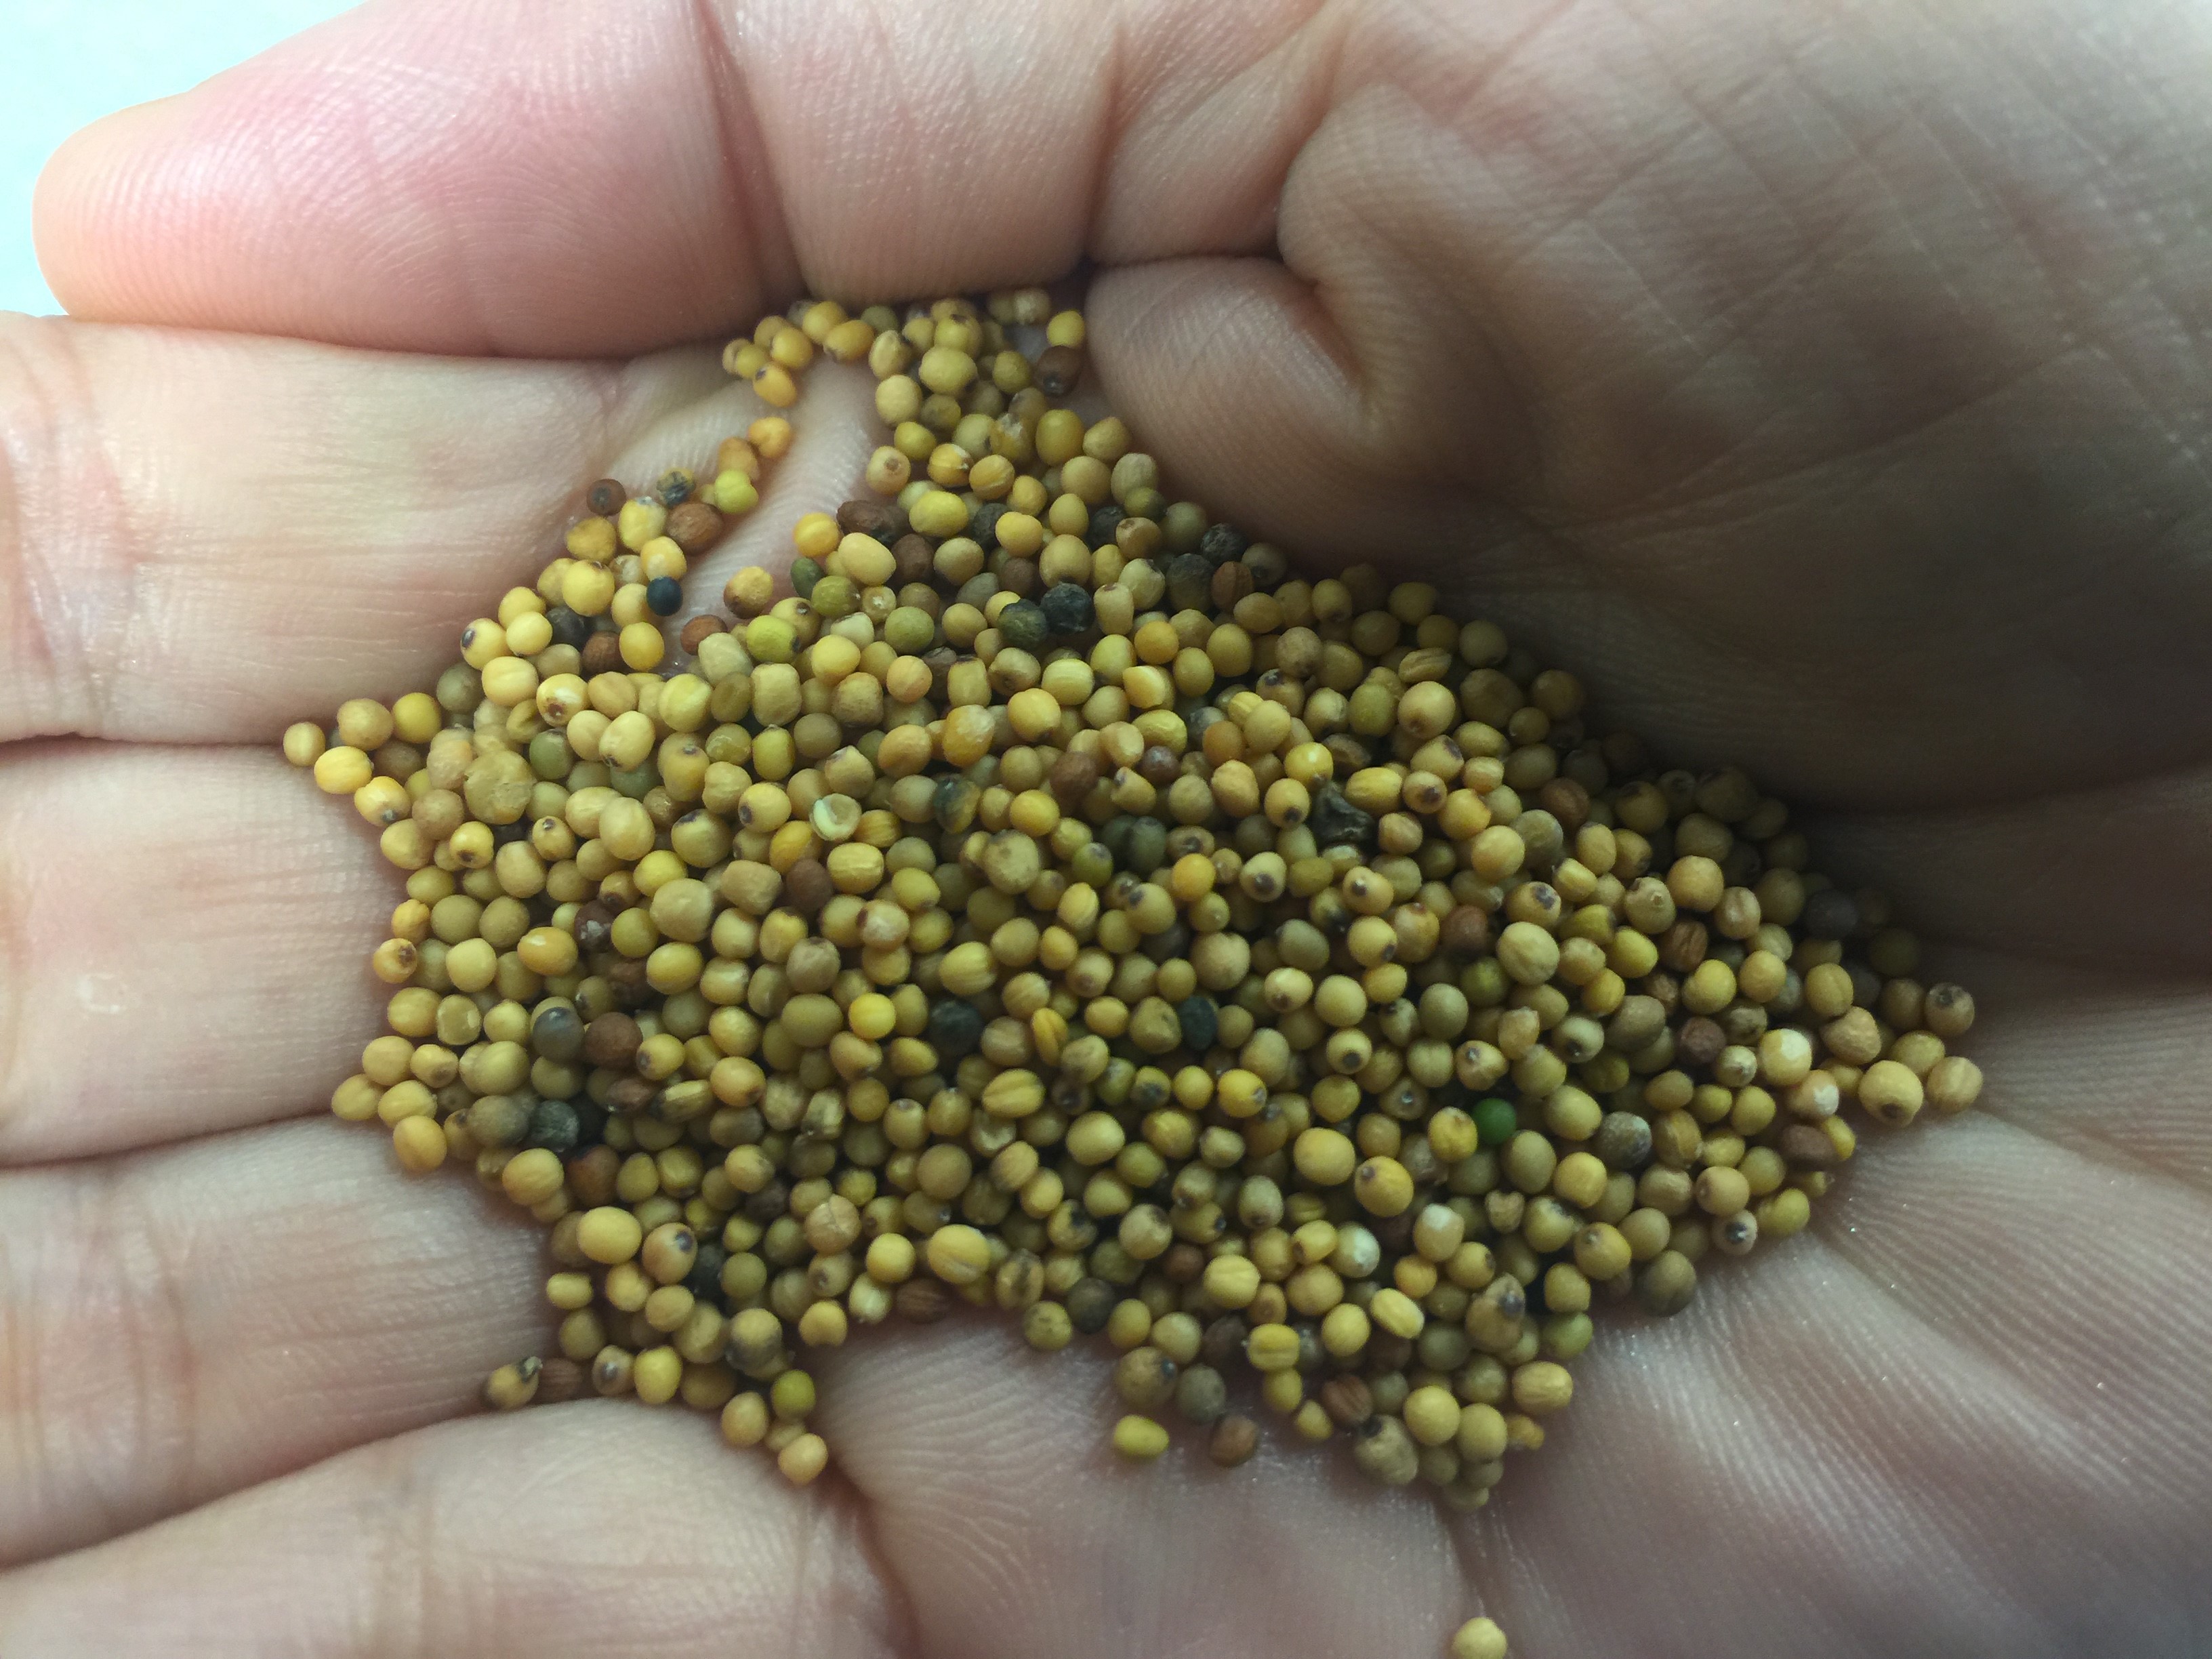 mustard seed experiment